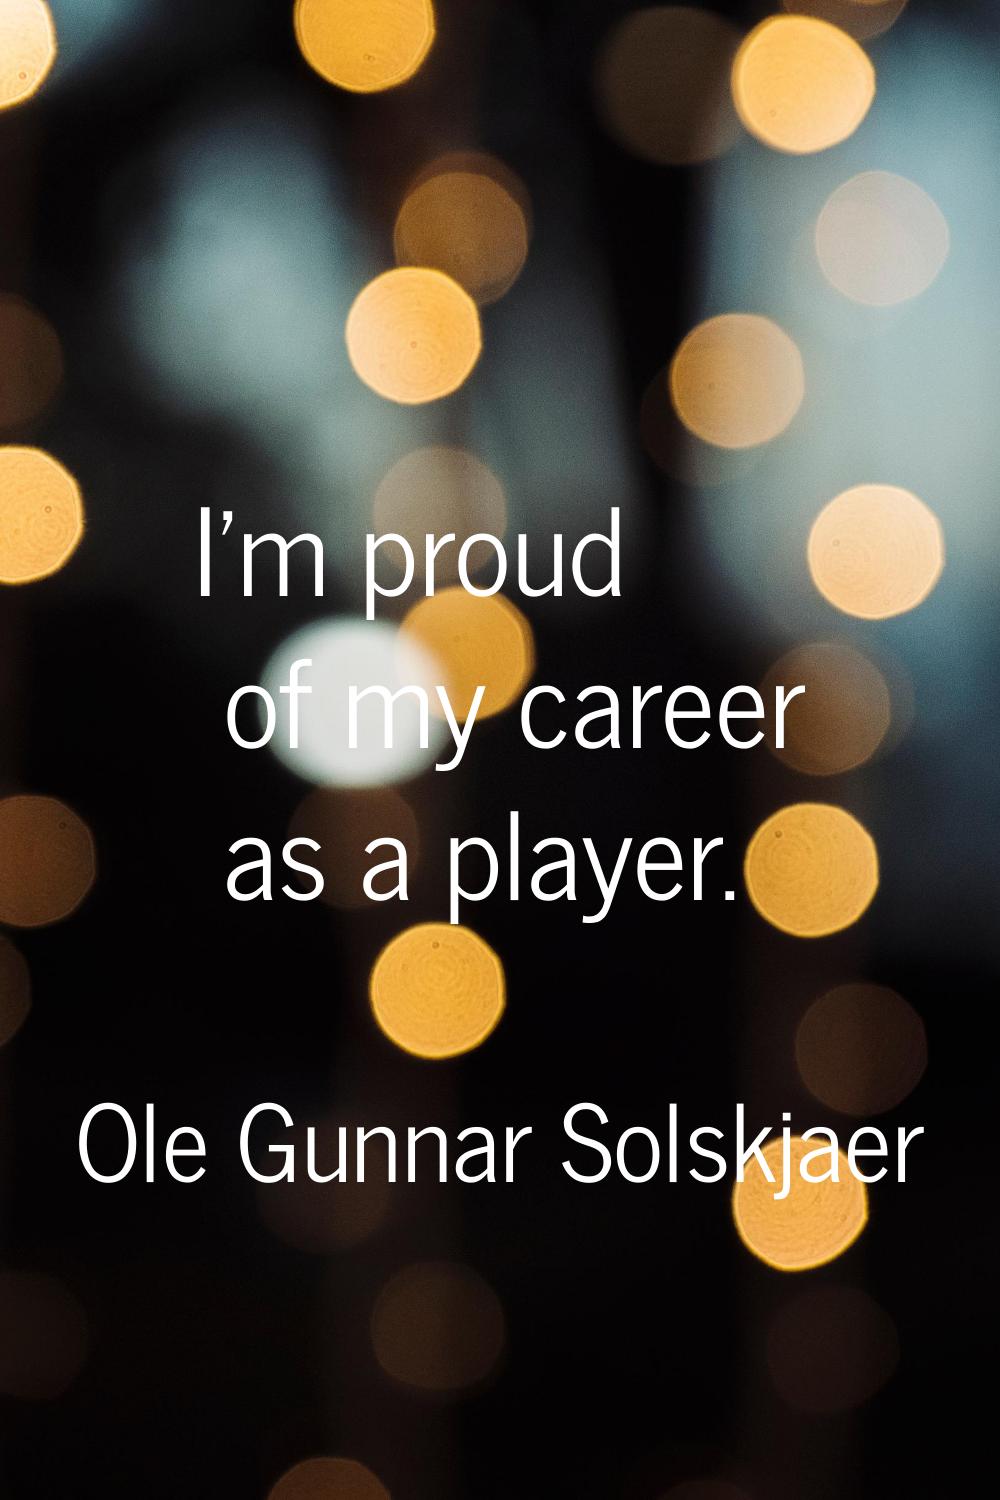 I'm proud of my career as a player.